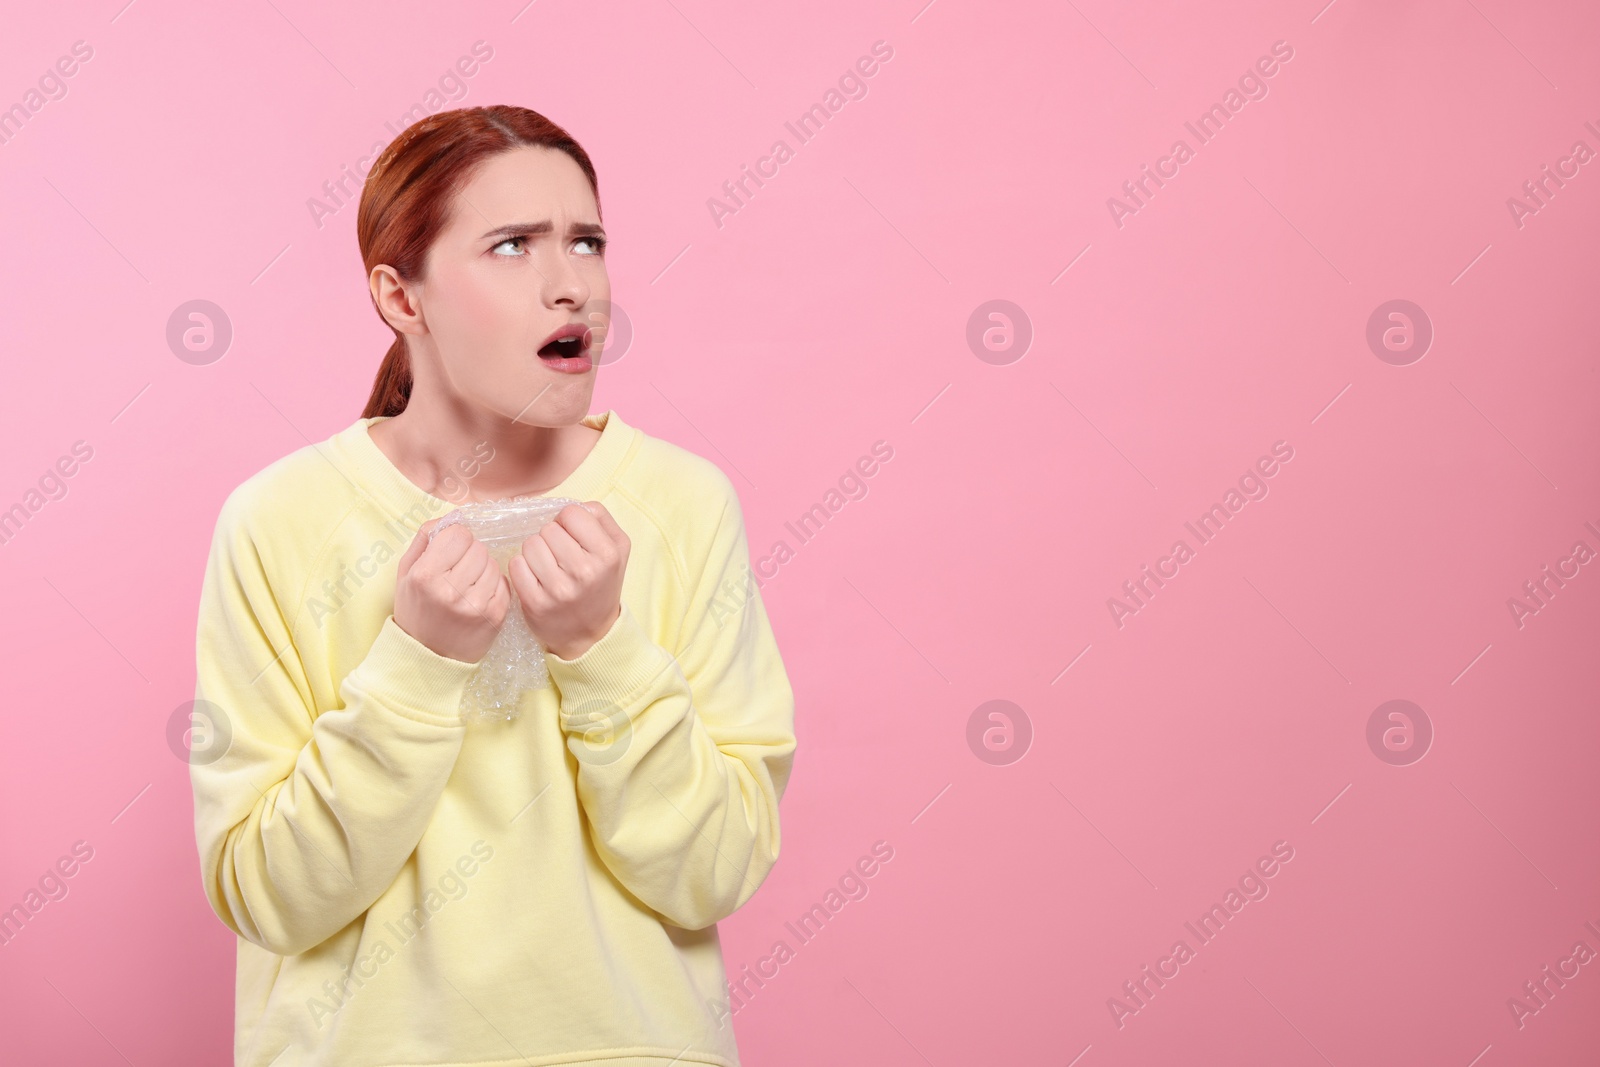 Photo of Angry woman popping bubble wrap on pink background, space for text. Stress relief